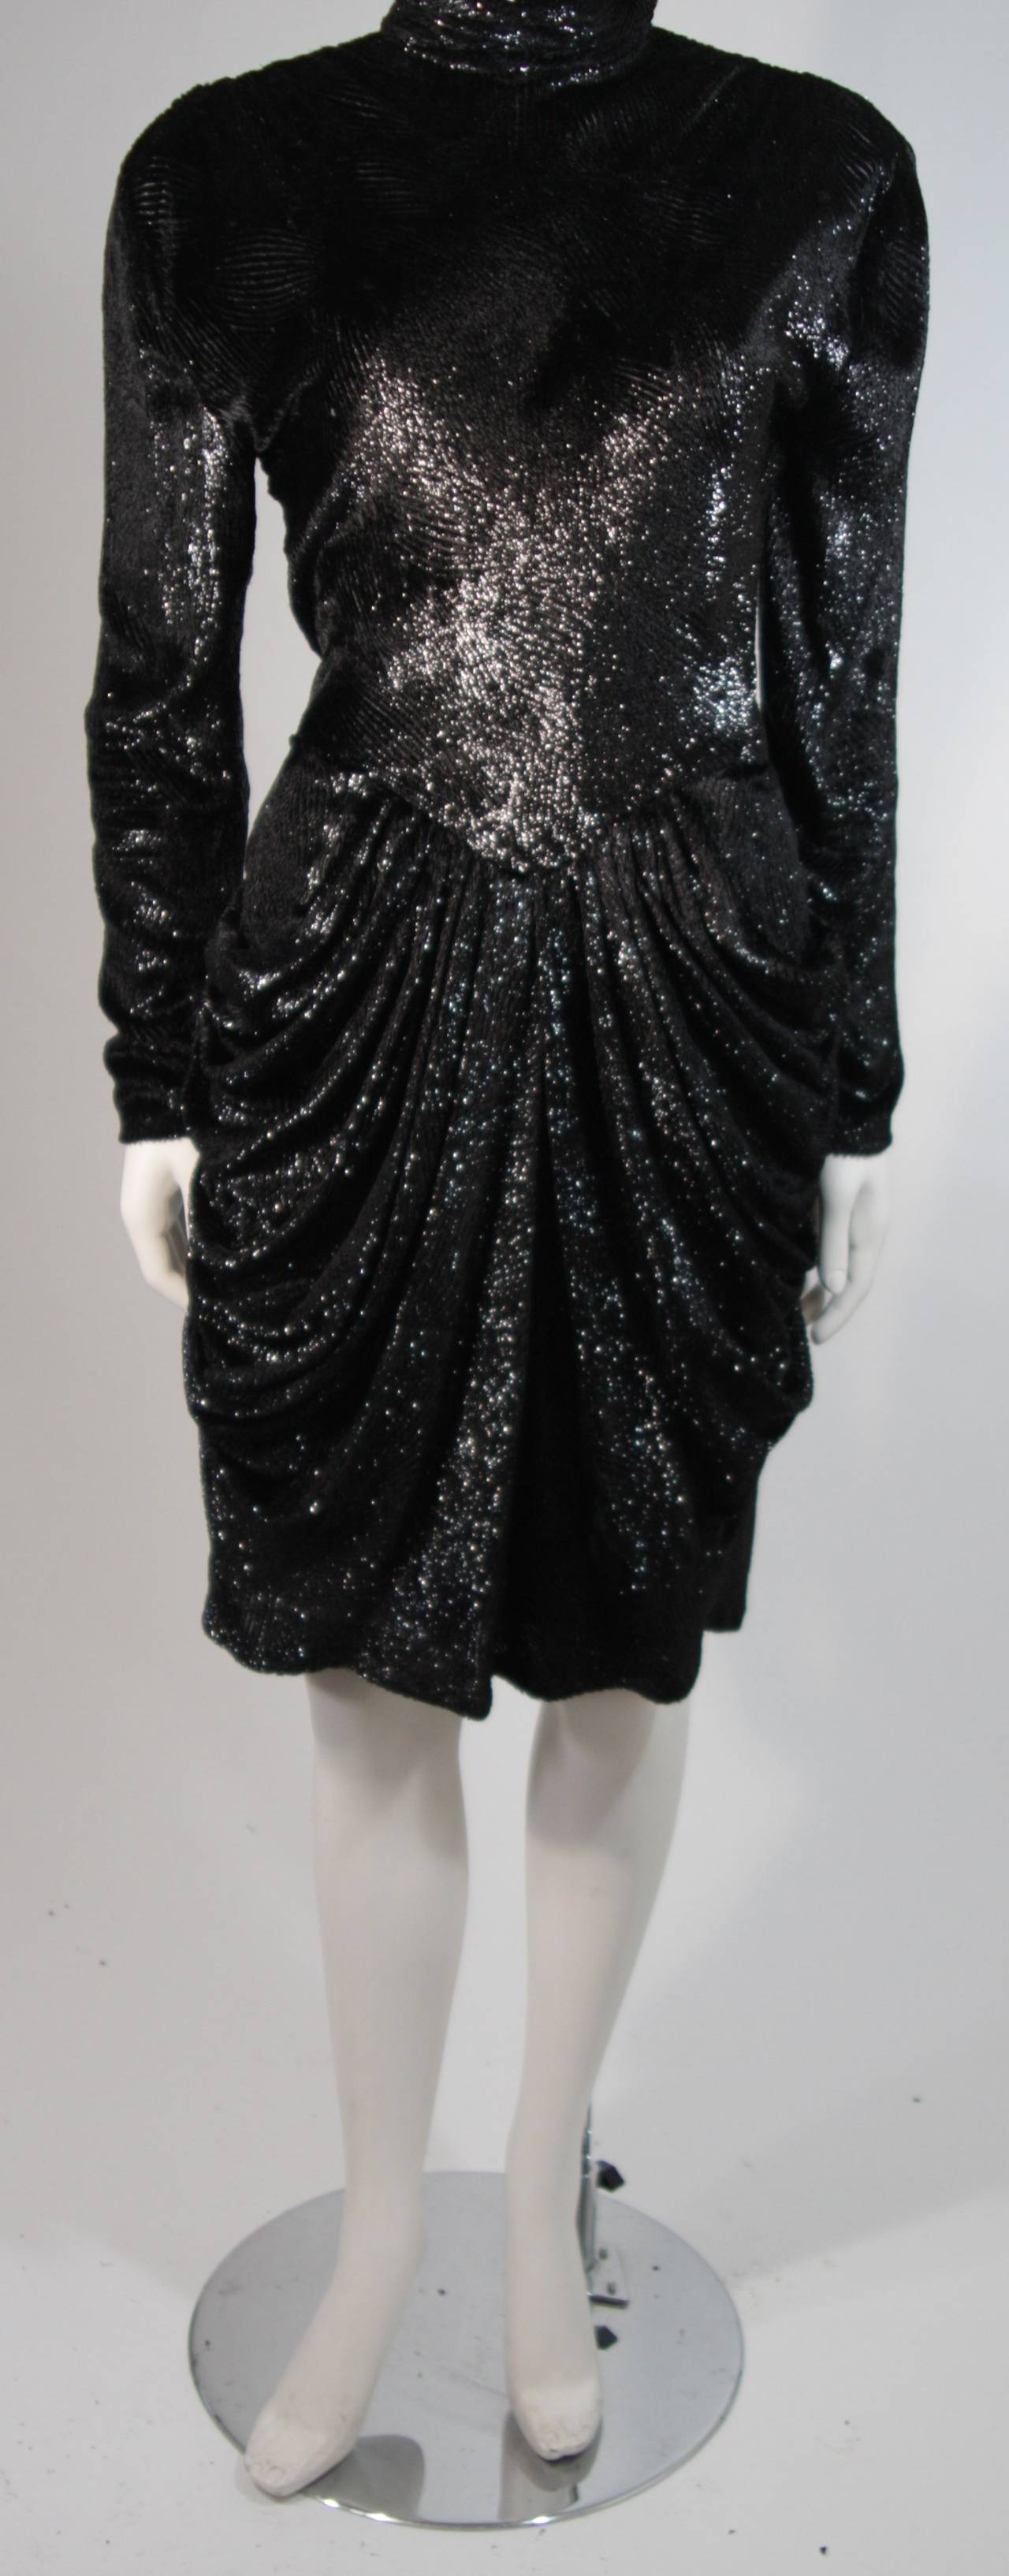 This Vicky Tiel cocktail dress is composed of a lightweight silky black metallic velvet.
There are gathers cascading from the waist and padded shoulders. There is a center back button closure for ease of access. In excellent condition. Made in